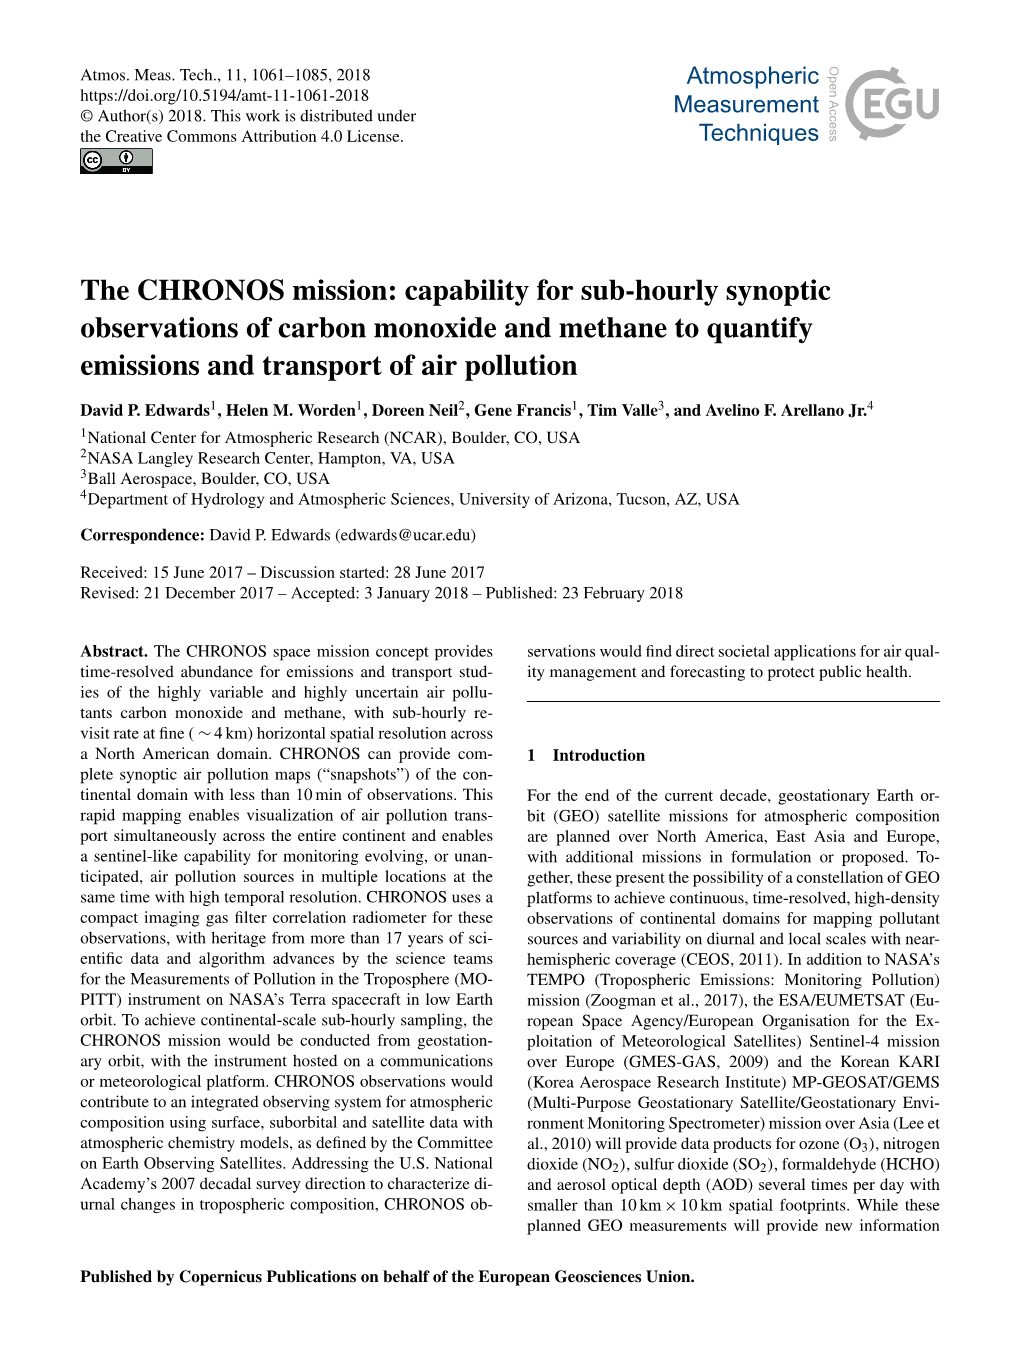 The CHRONOS Mission: Capability for Sub-Hourly Synoptic Observations of Carbon Monoxide and Methane to Quantify Emissions and Transport of Air Pollution